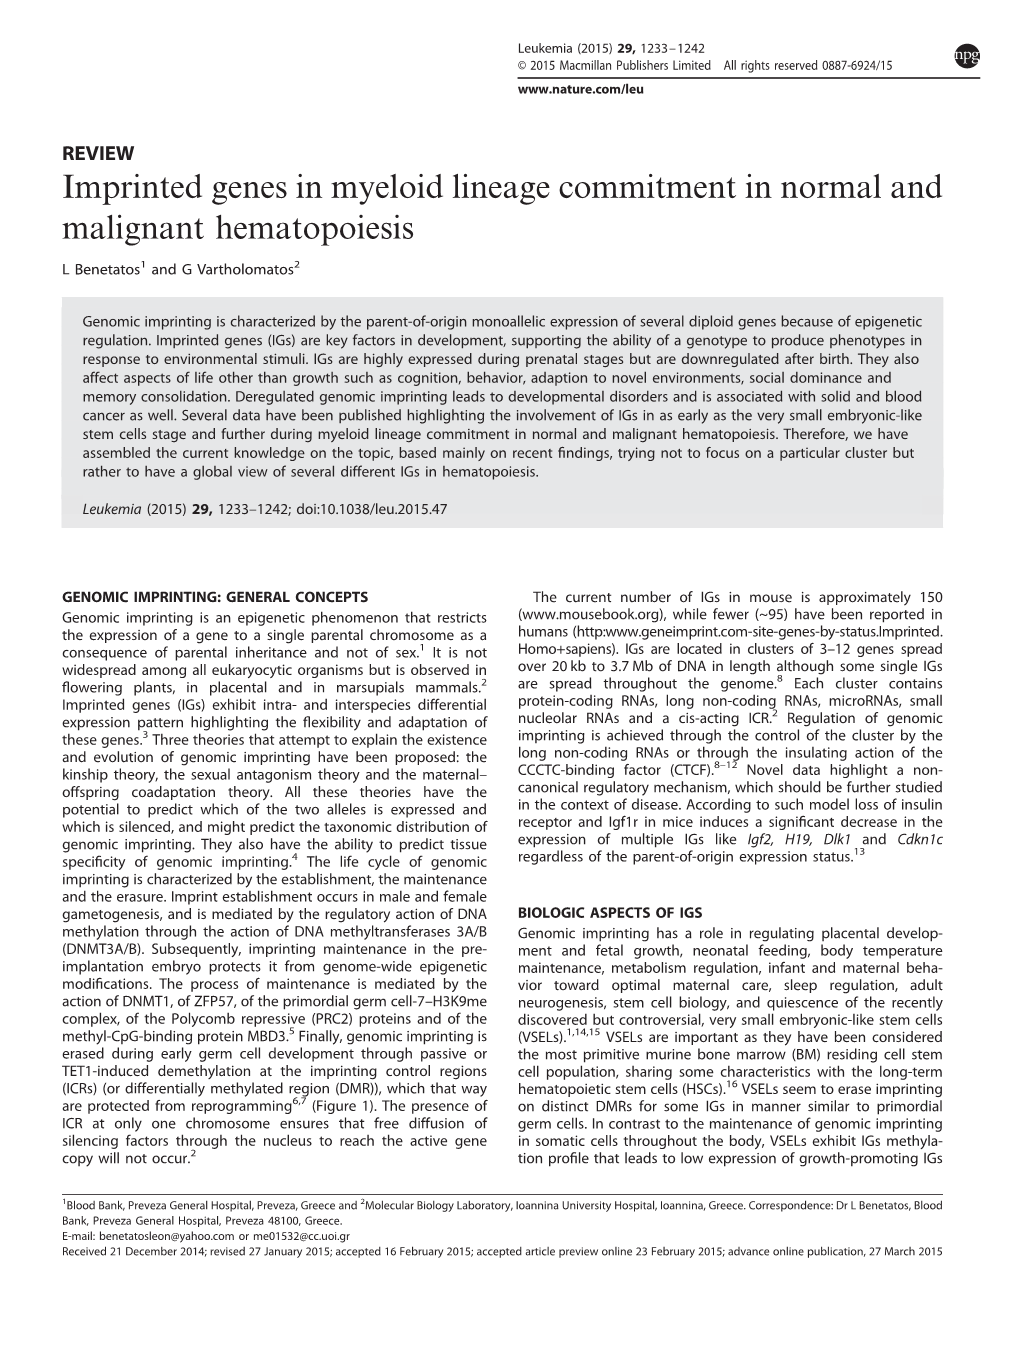 Imprinted Genes in Myeloid Lineage Commitment in Normal and Malignant Hematopoiesis